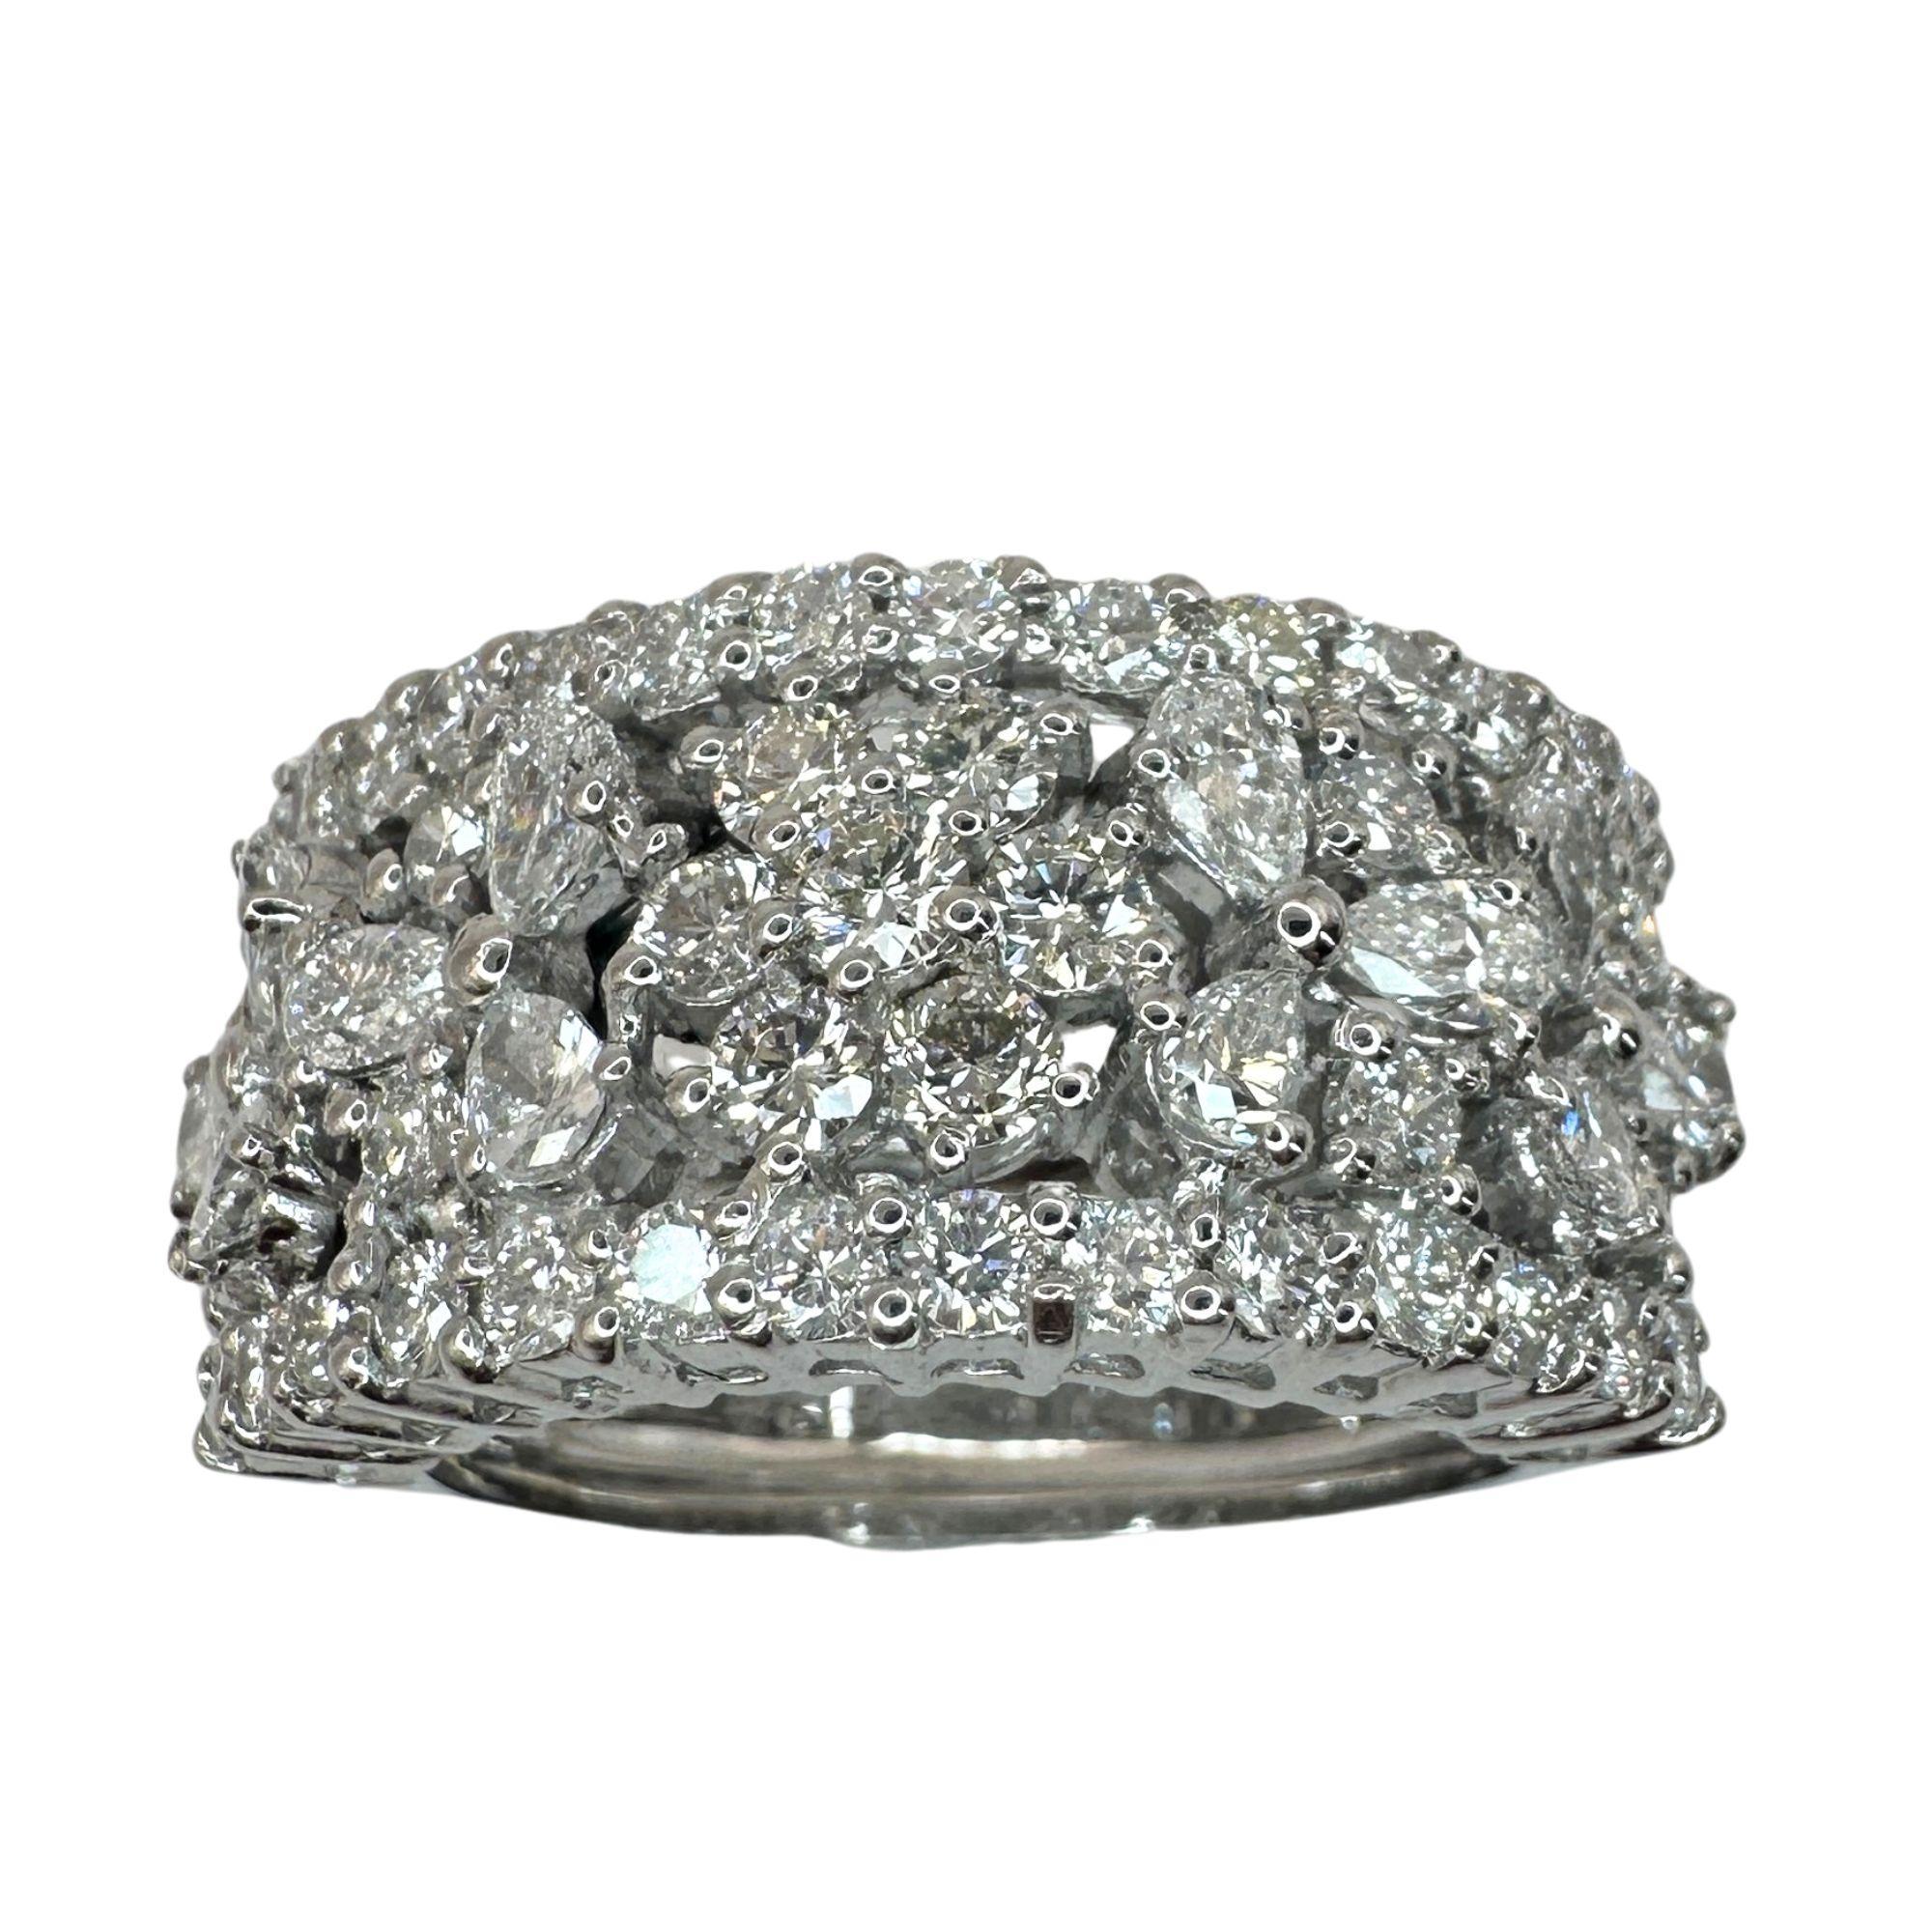 Experience luxury and elegance with our 18k Diamond Wide Band Ring. Featuring 2.21 carats of sparkling round and pear shaped diamonds, this ring is perfect for adding an extra detail any outfit. Made with 18k white gold, it's in good condition with